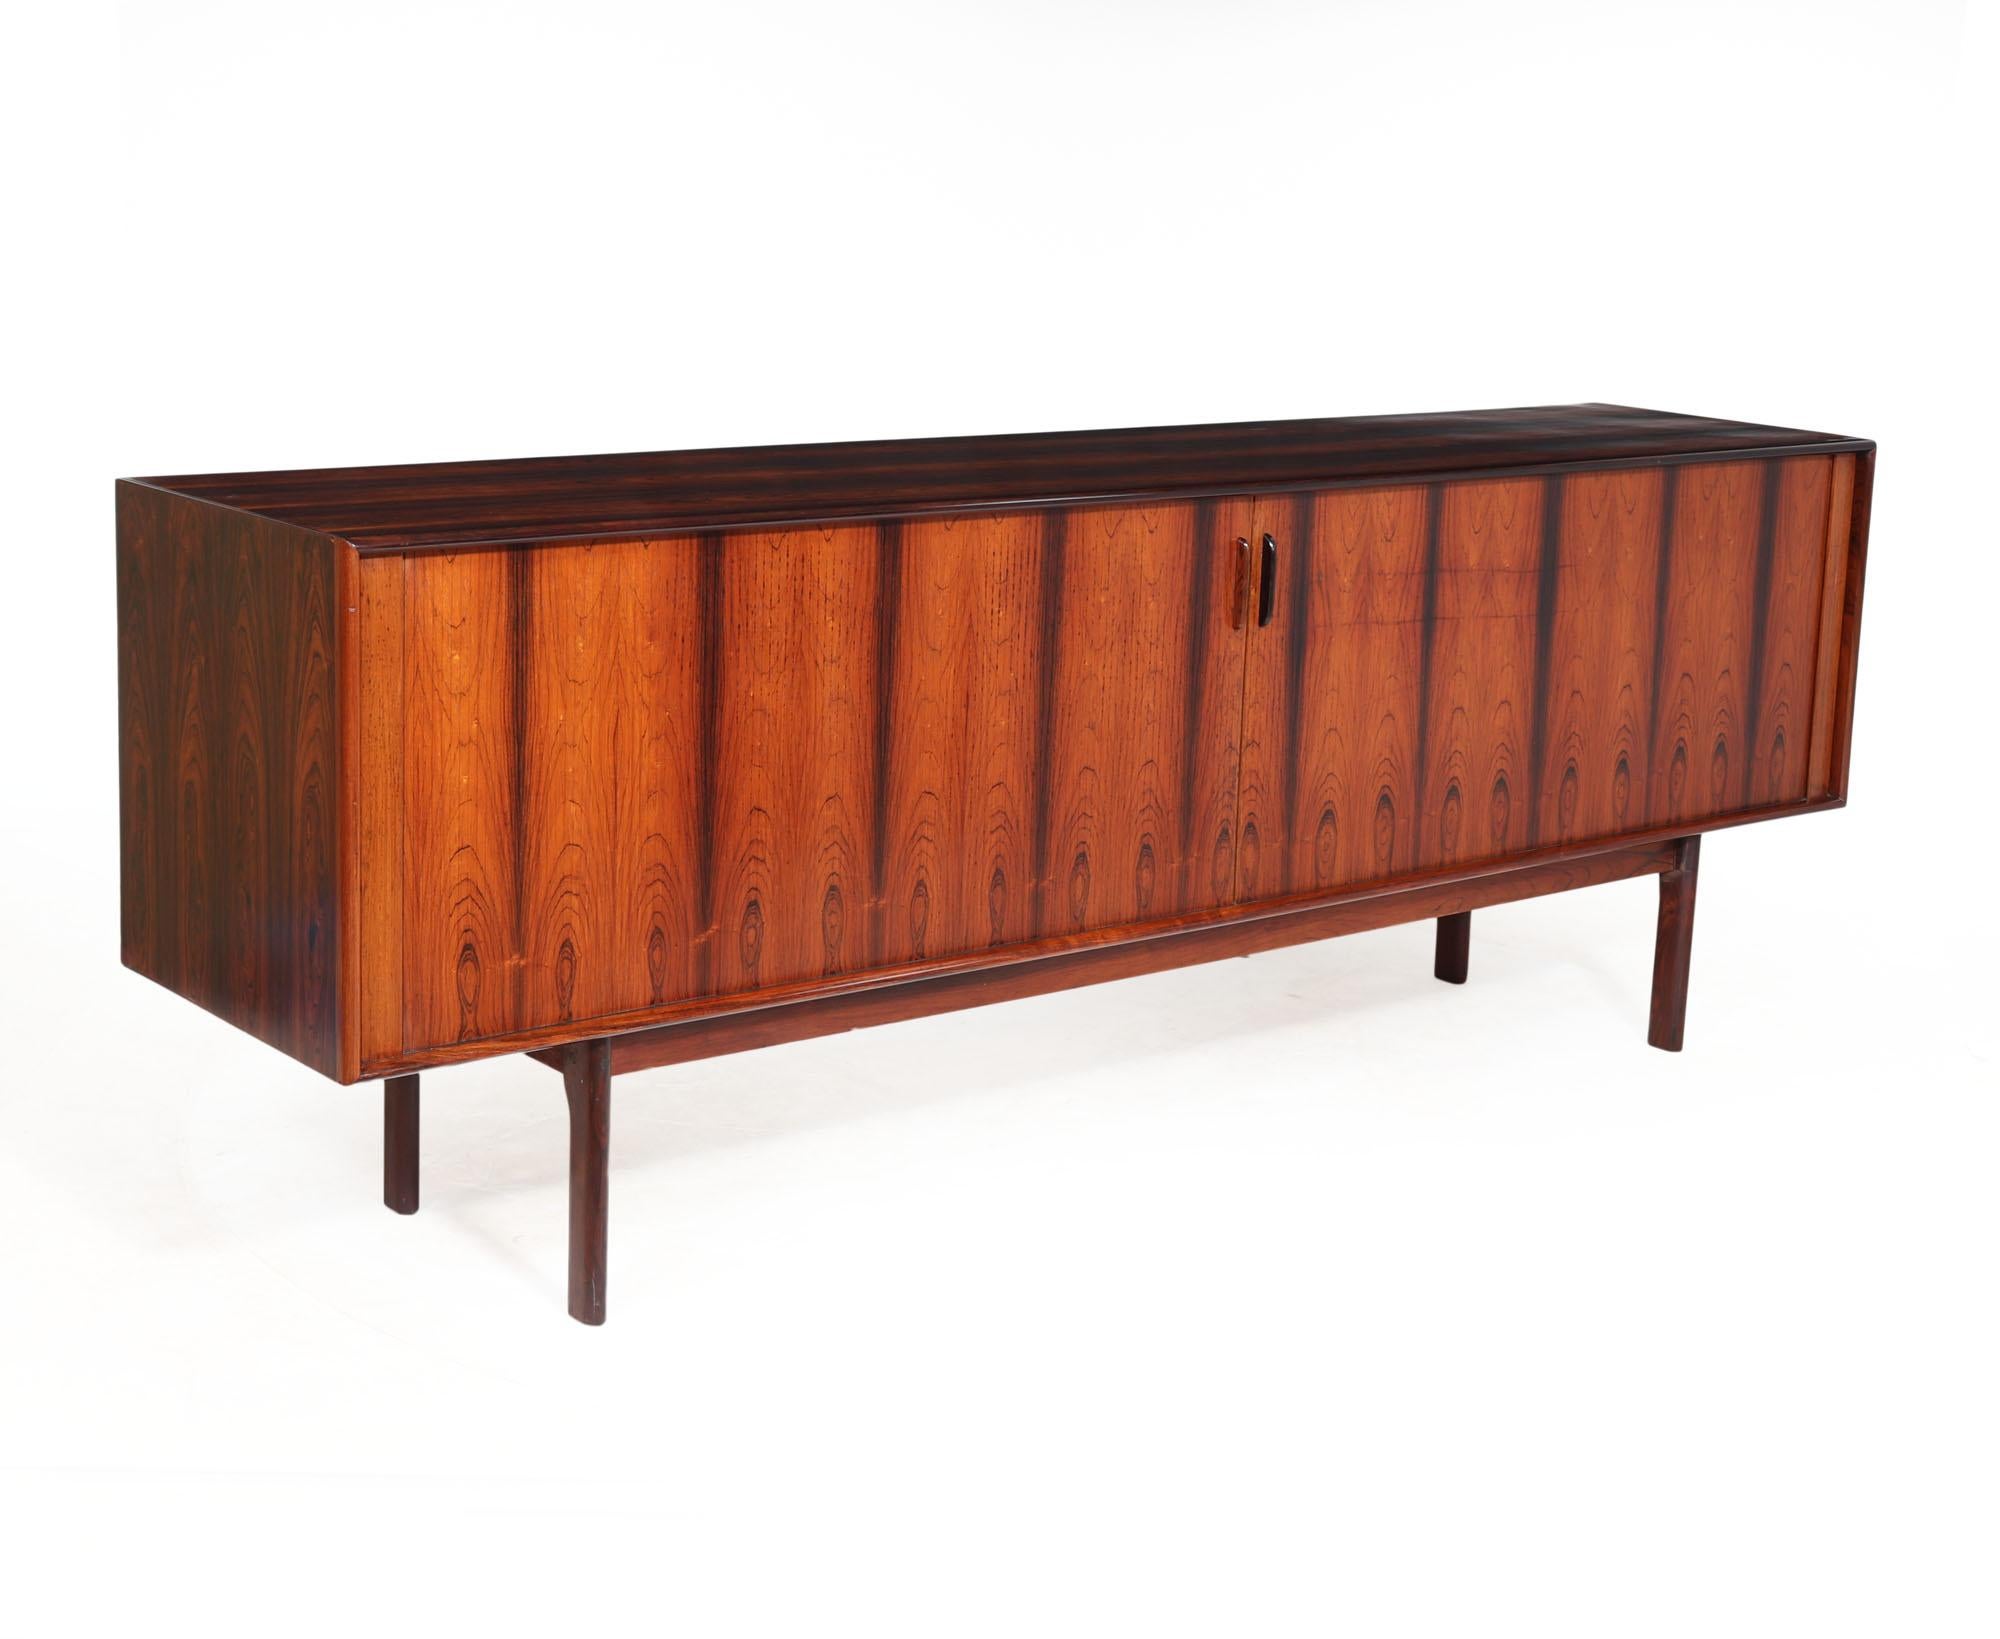 MID CENTURY TAMBOUR DOOR SIDEBOARD 
A lovely mid century danish sideboard with tambour doors designed and produced by Bernhard Pedersen in the 1960’s, the tambour doors slide smoothly and slide as if to disappear inside the cabinet, freestanding so